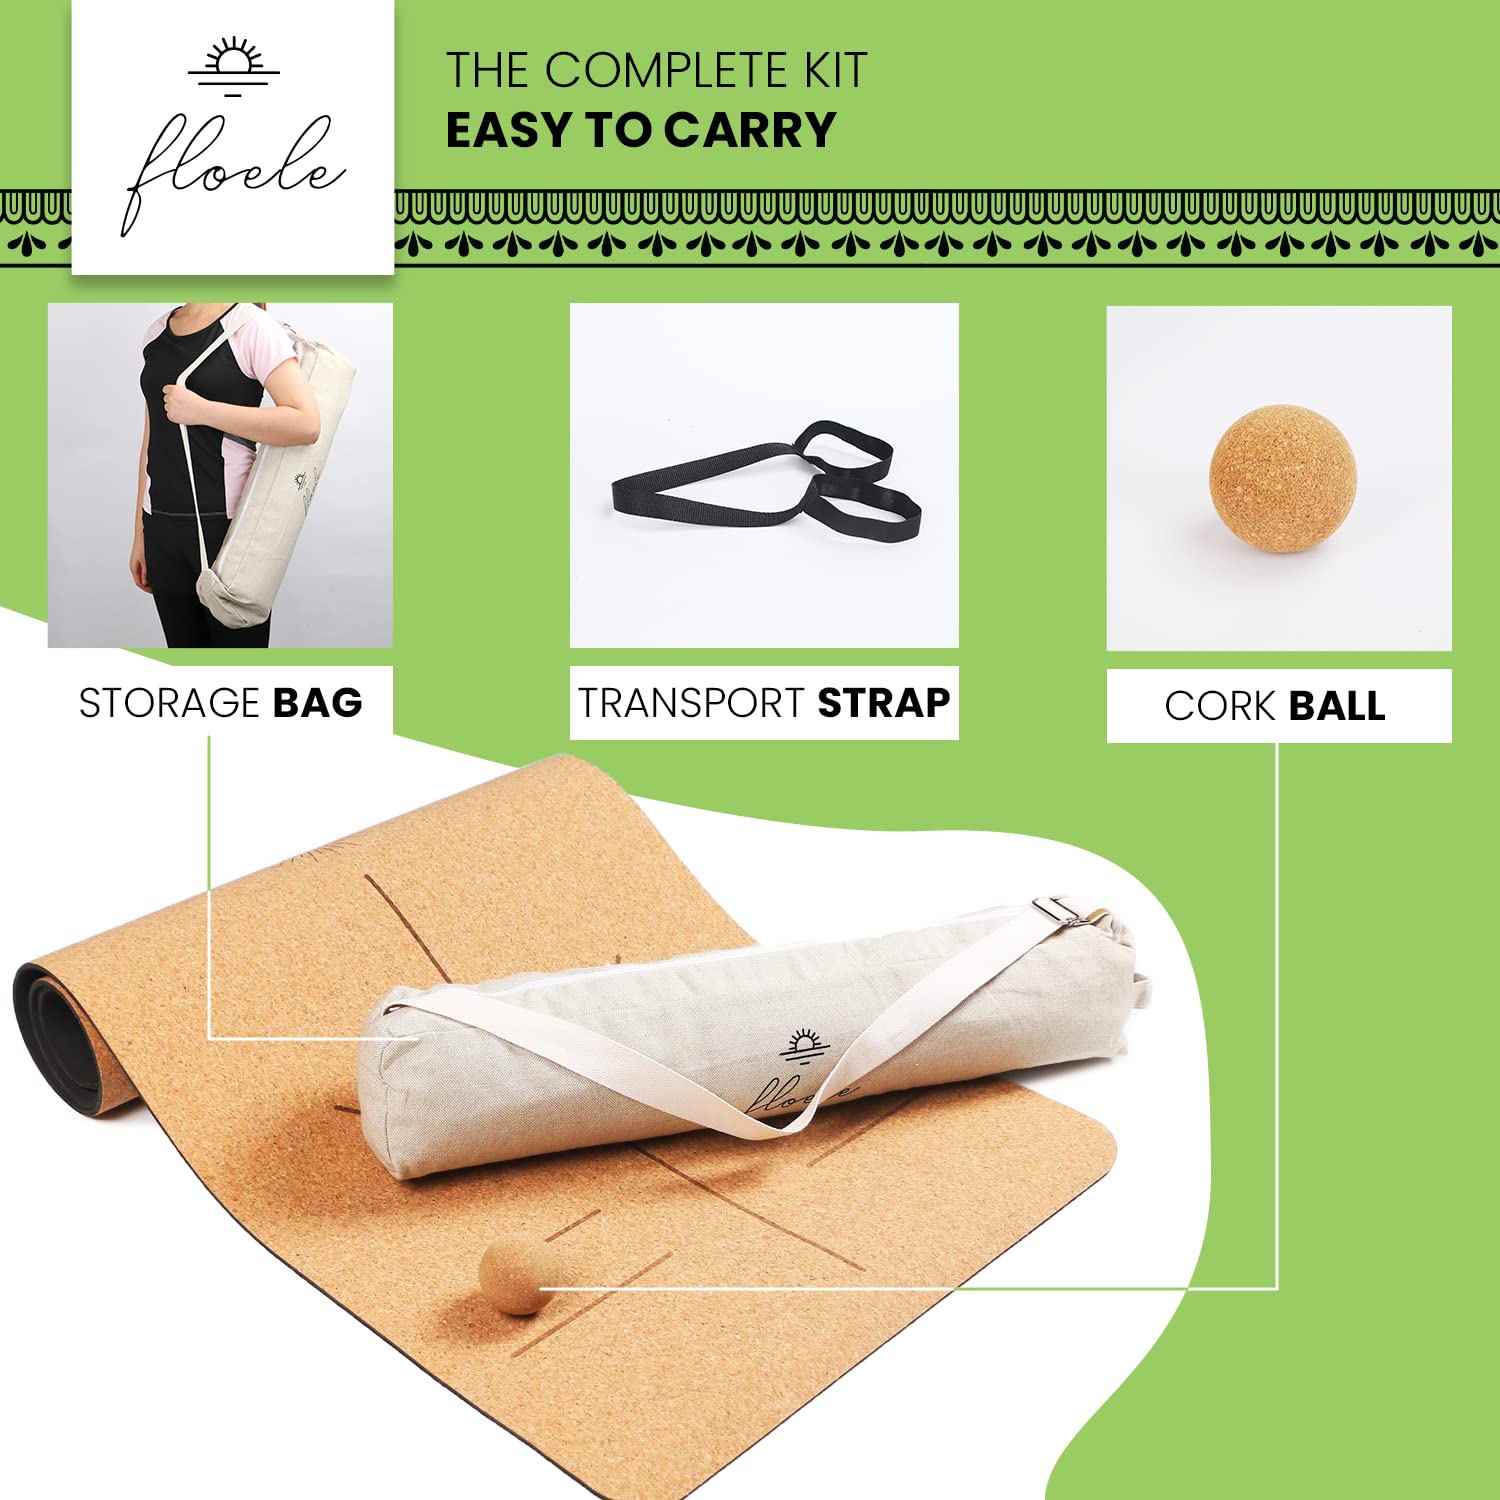 Foldable Cork Yoga Mat: Compact, Lightweight, and Perfect for On